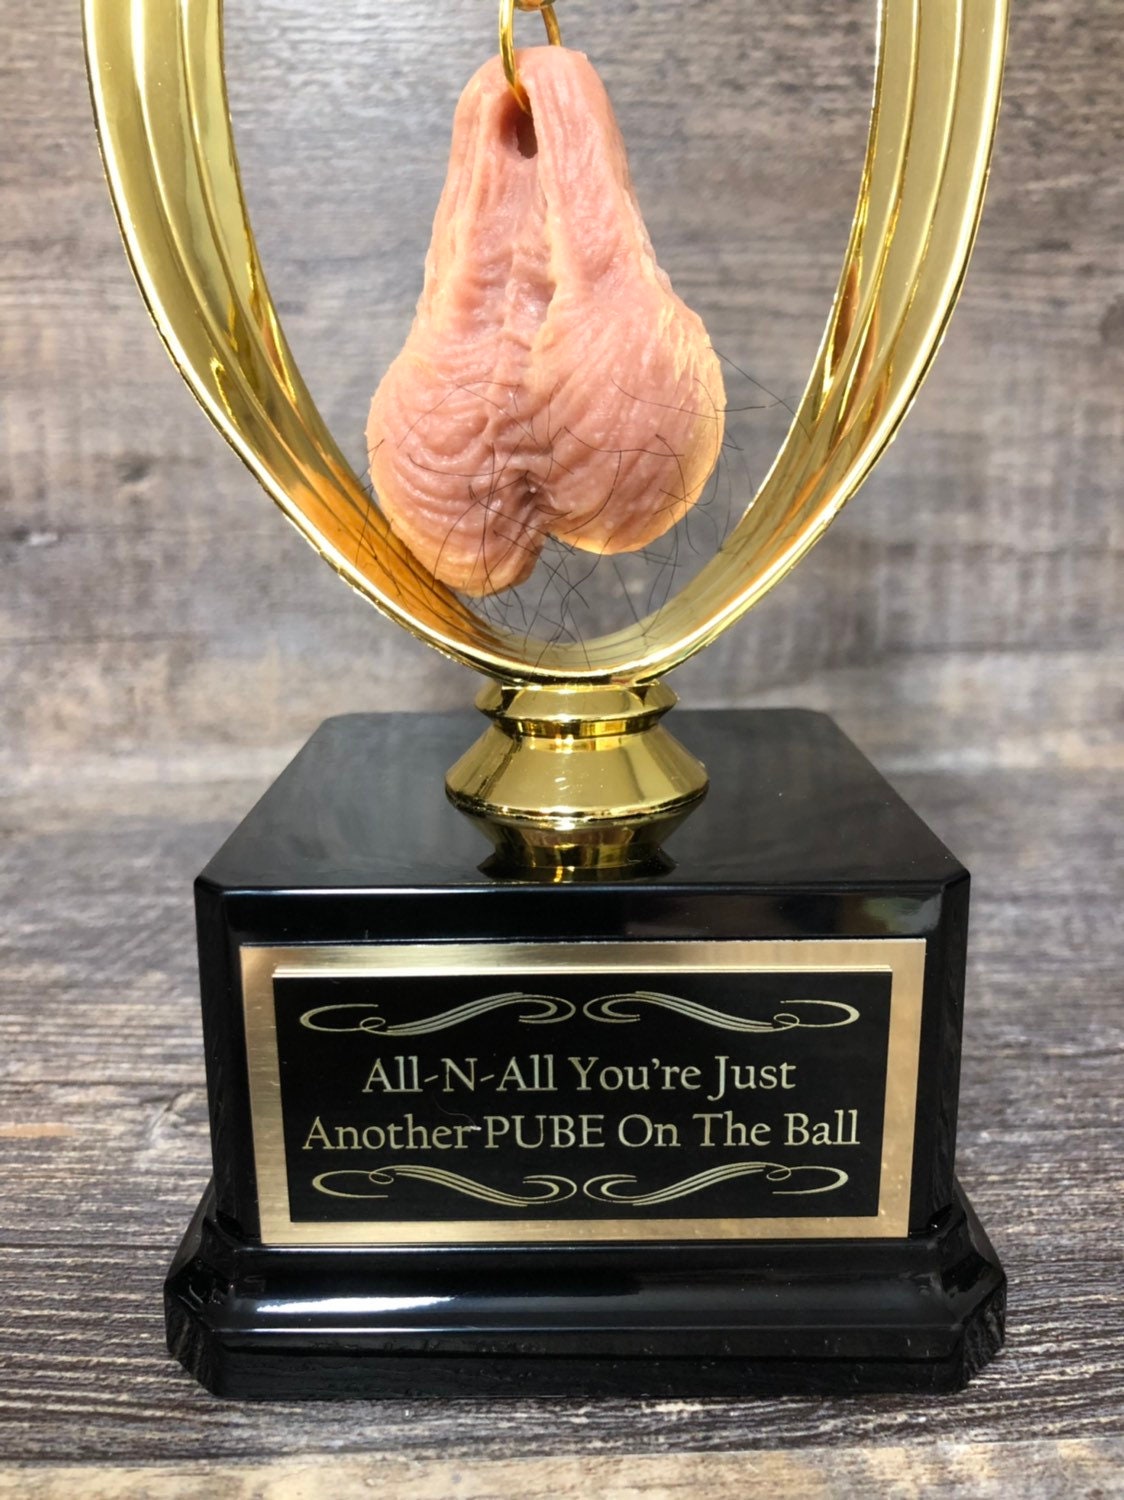 HAIRY Balls All N' All You're Just Another Pube On The Ball Funny Trophy You Suck Loser Trophy FFL Sacko Adult Humor Gag Gift Testicle